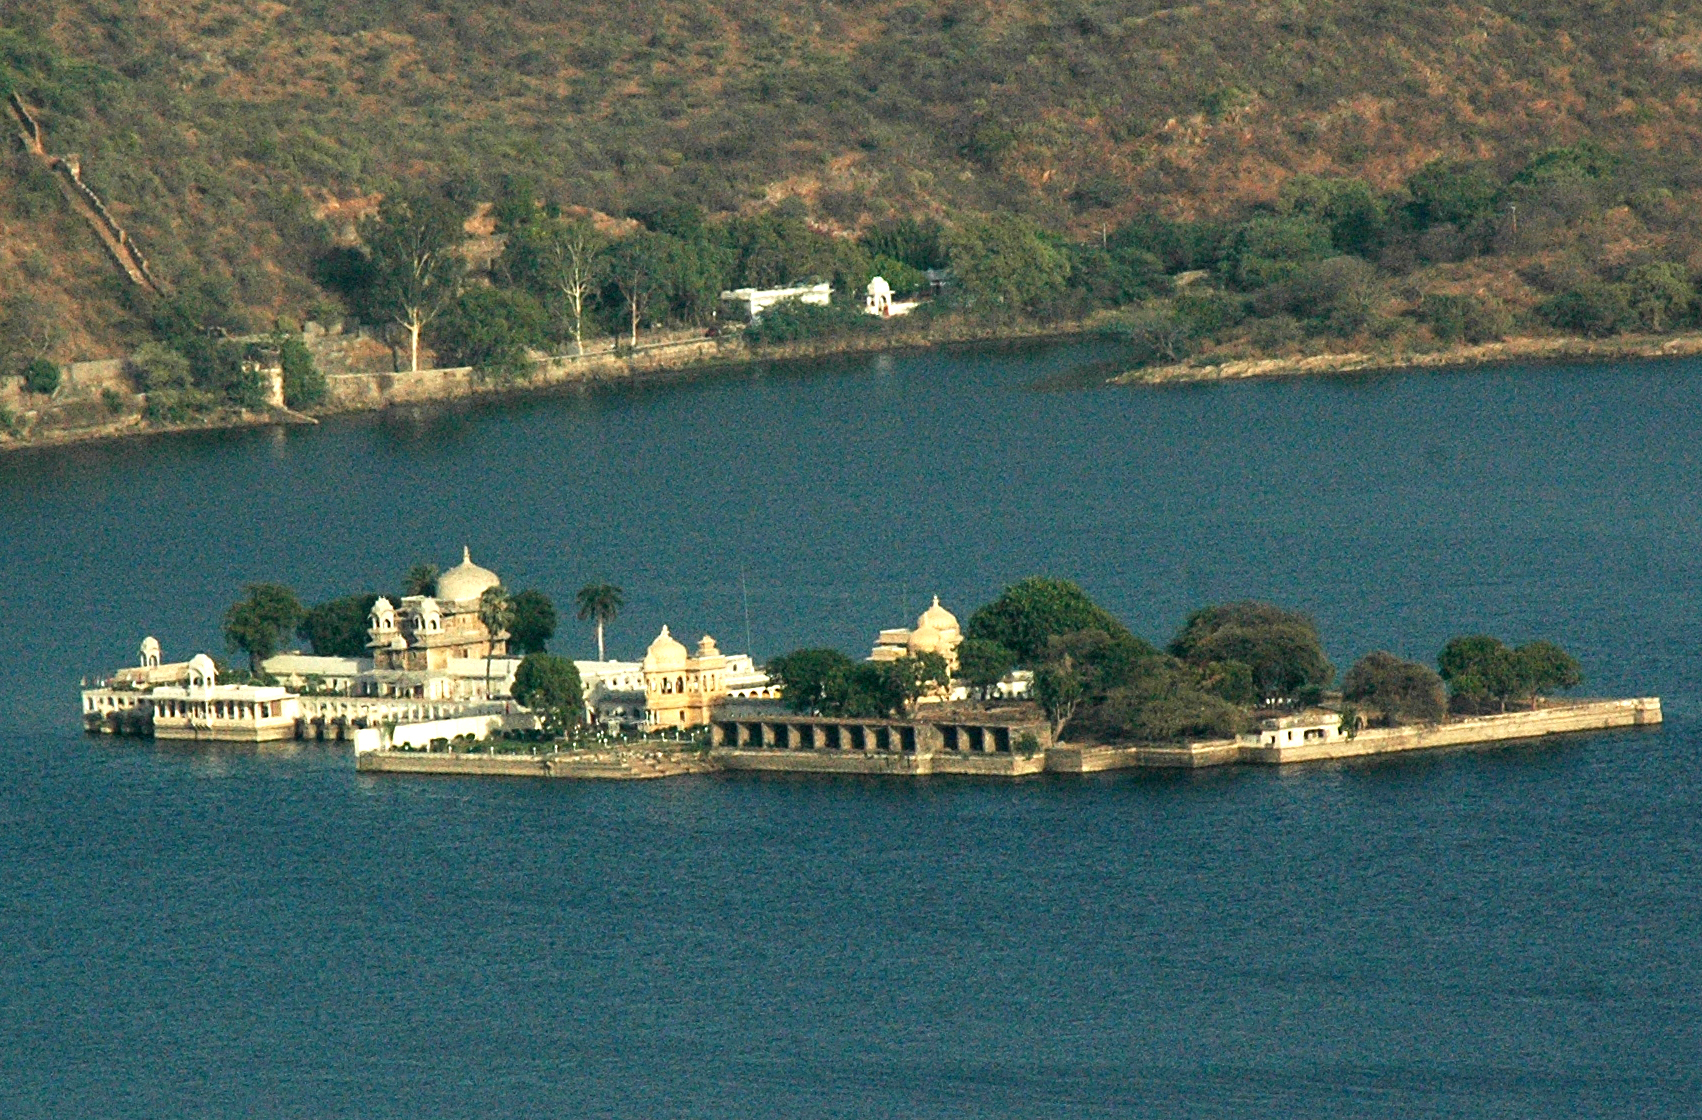 It is a palace located on an island in Lake Pichola